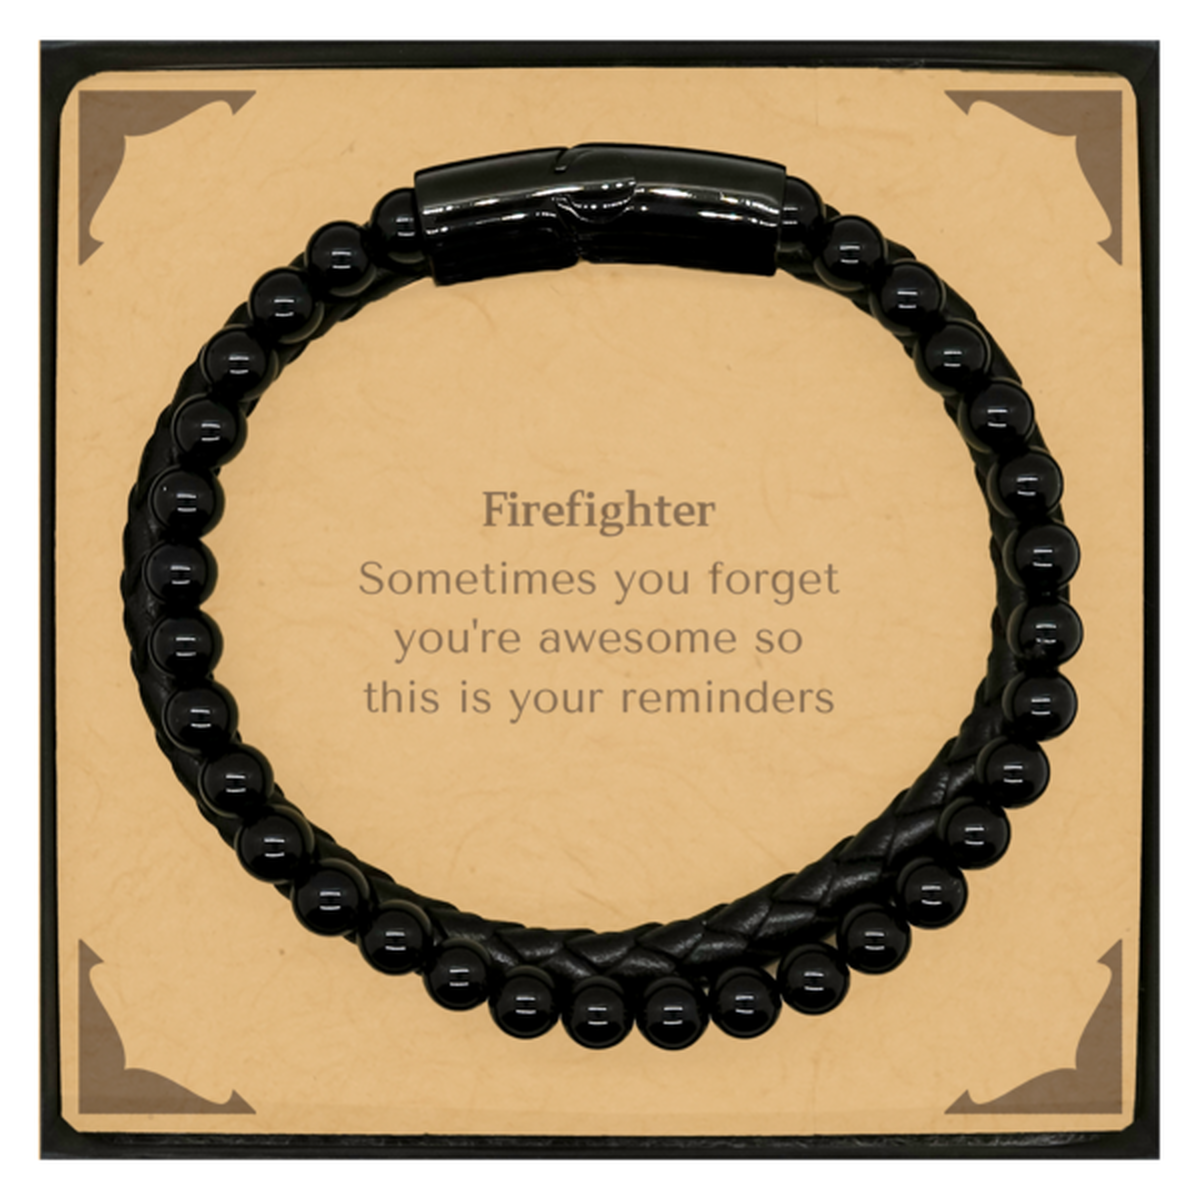 Sentimental Firefighter Stone Leather Bracelets, Firefighter Sometimes you forget you're awesome so this is your reminders, Graduation Christmas Birthday Gifts for Firefighter, Men, Women, Coworkers